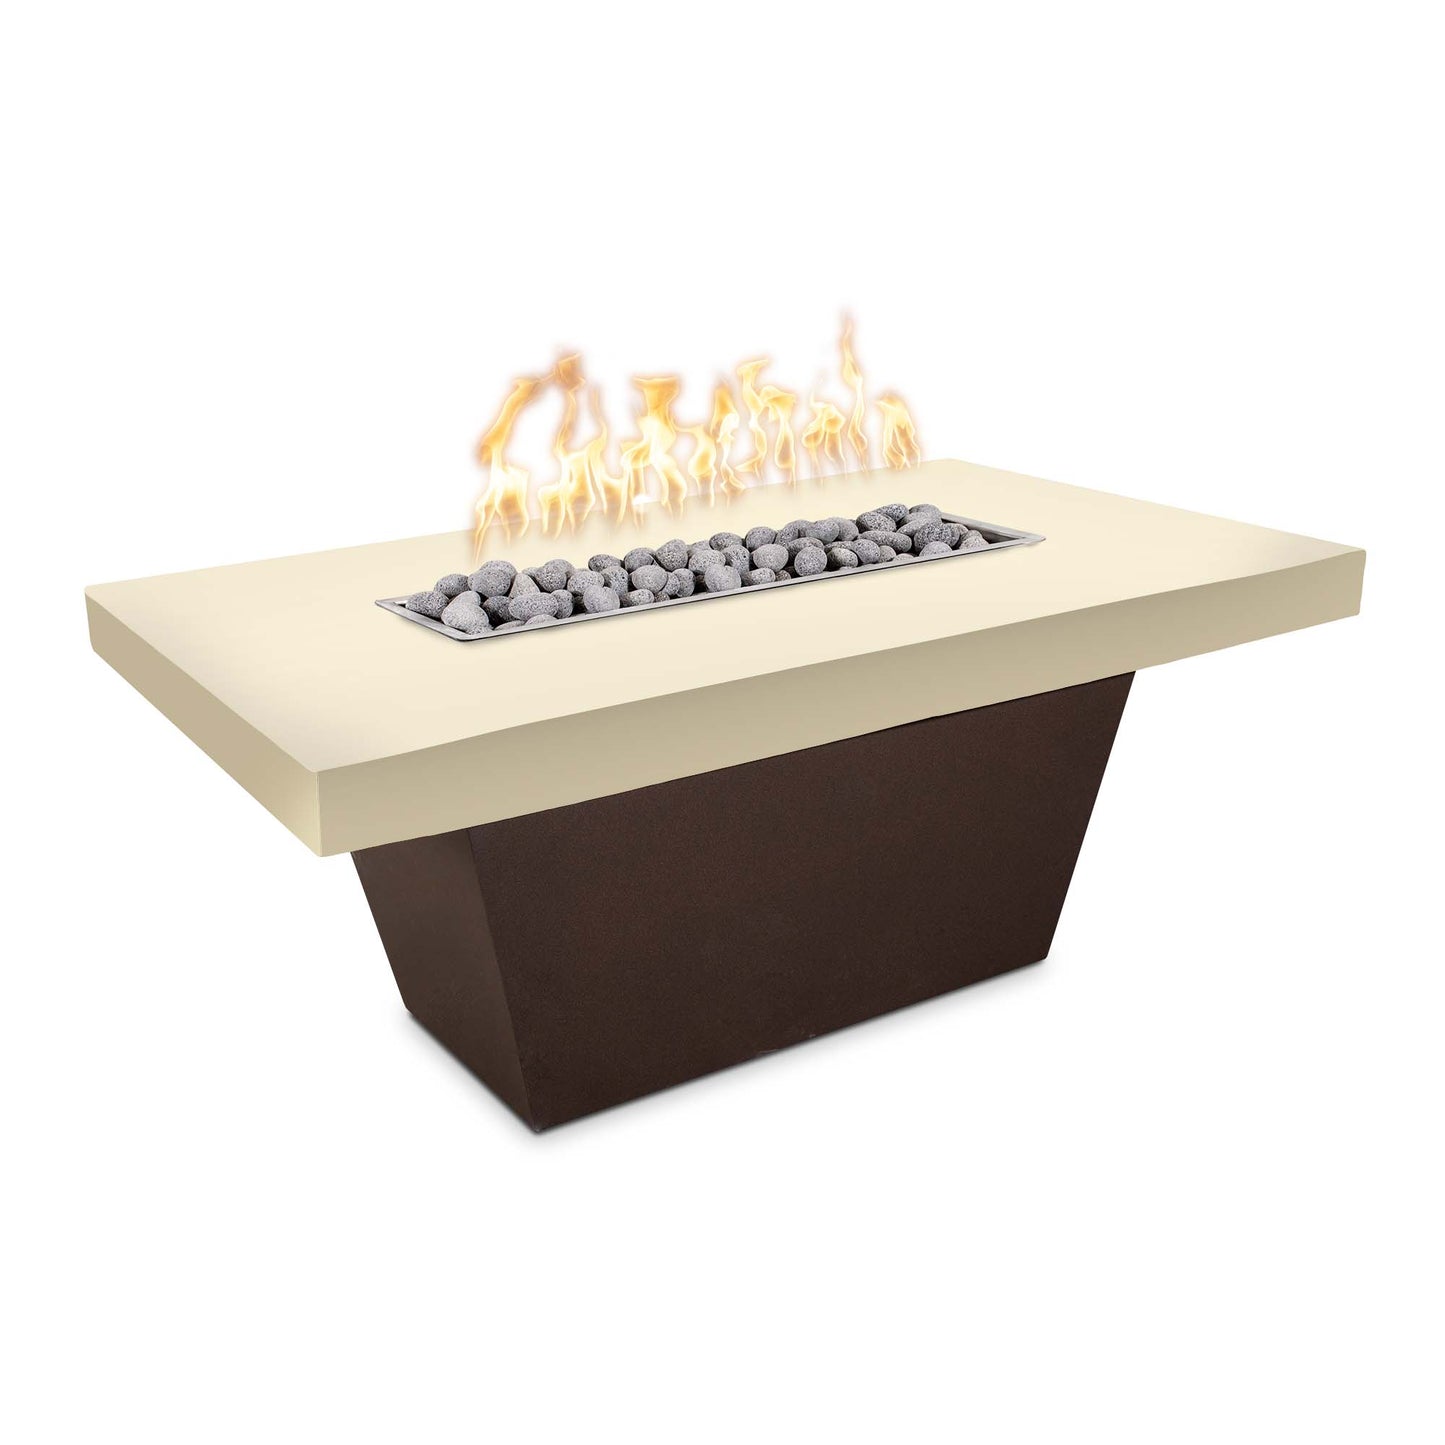 The Outdoor Plus Tacoma 48" Brown Concrete Top & White Powder Coated Base Liquid Propane Fire Table with Match Lit Ignition